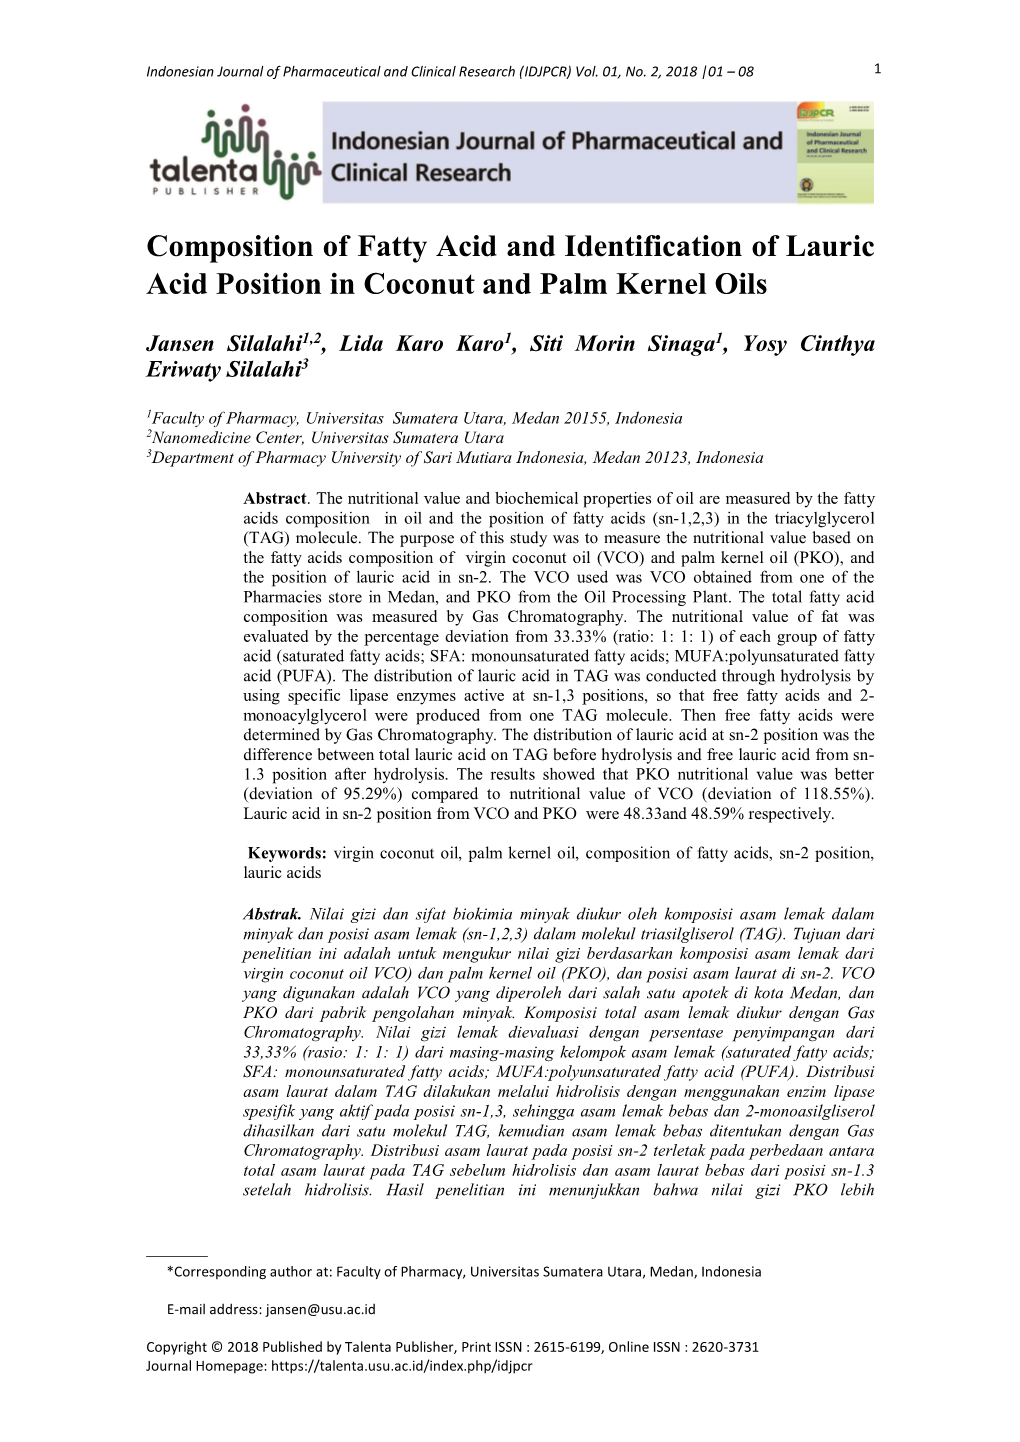 Composition of Fatty Acid and Identification of Lauric Acid Position in Coconut and Palm Kernel Oils